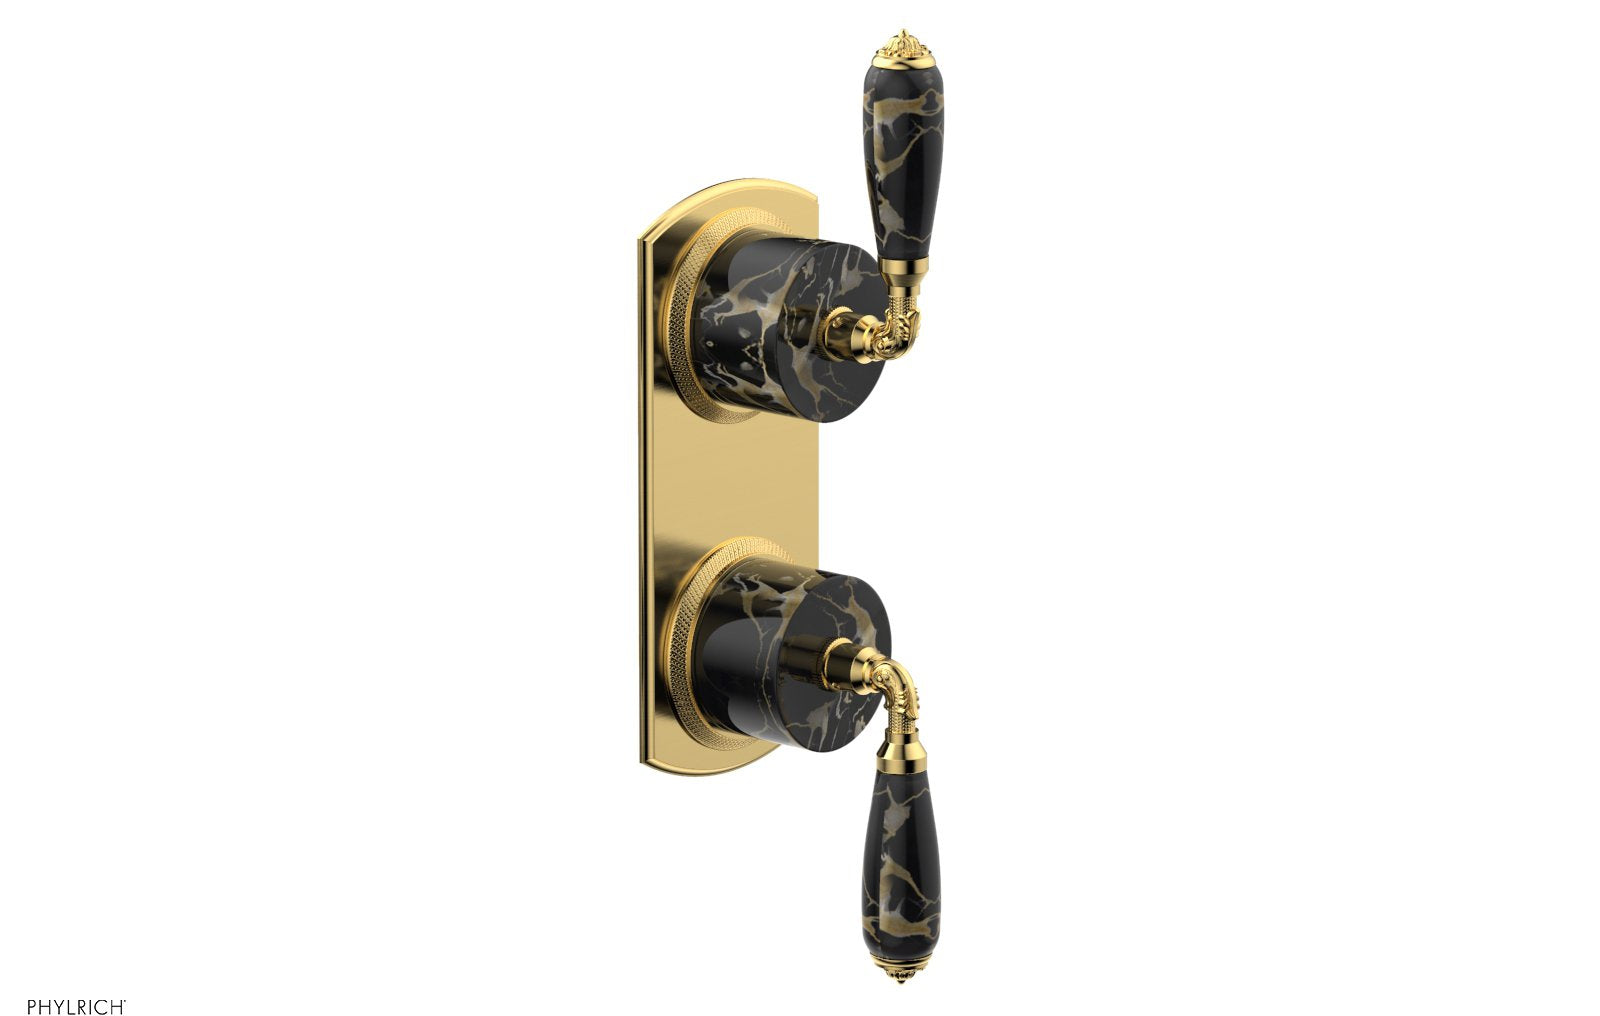 Phylrich VALENCIA Thermostatic Valve with Volume Control or Diverter, Black Marble Lever Handles